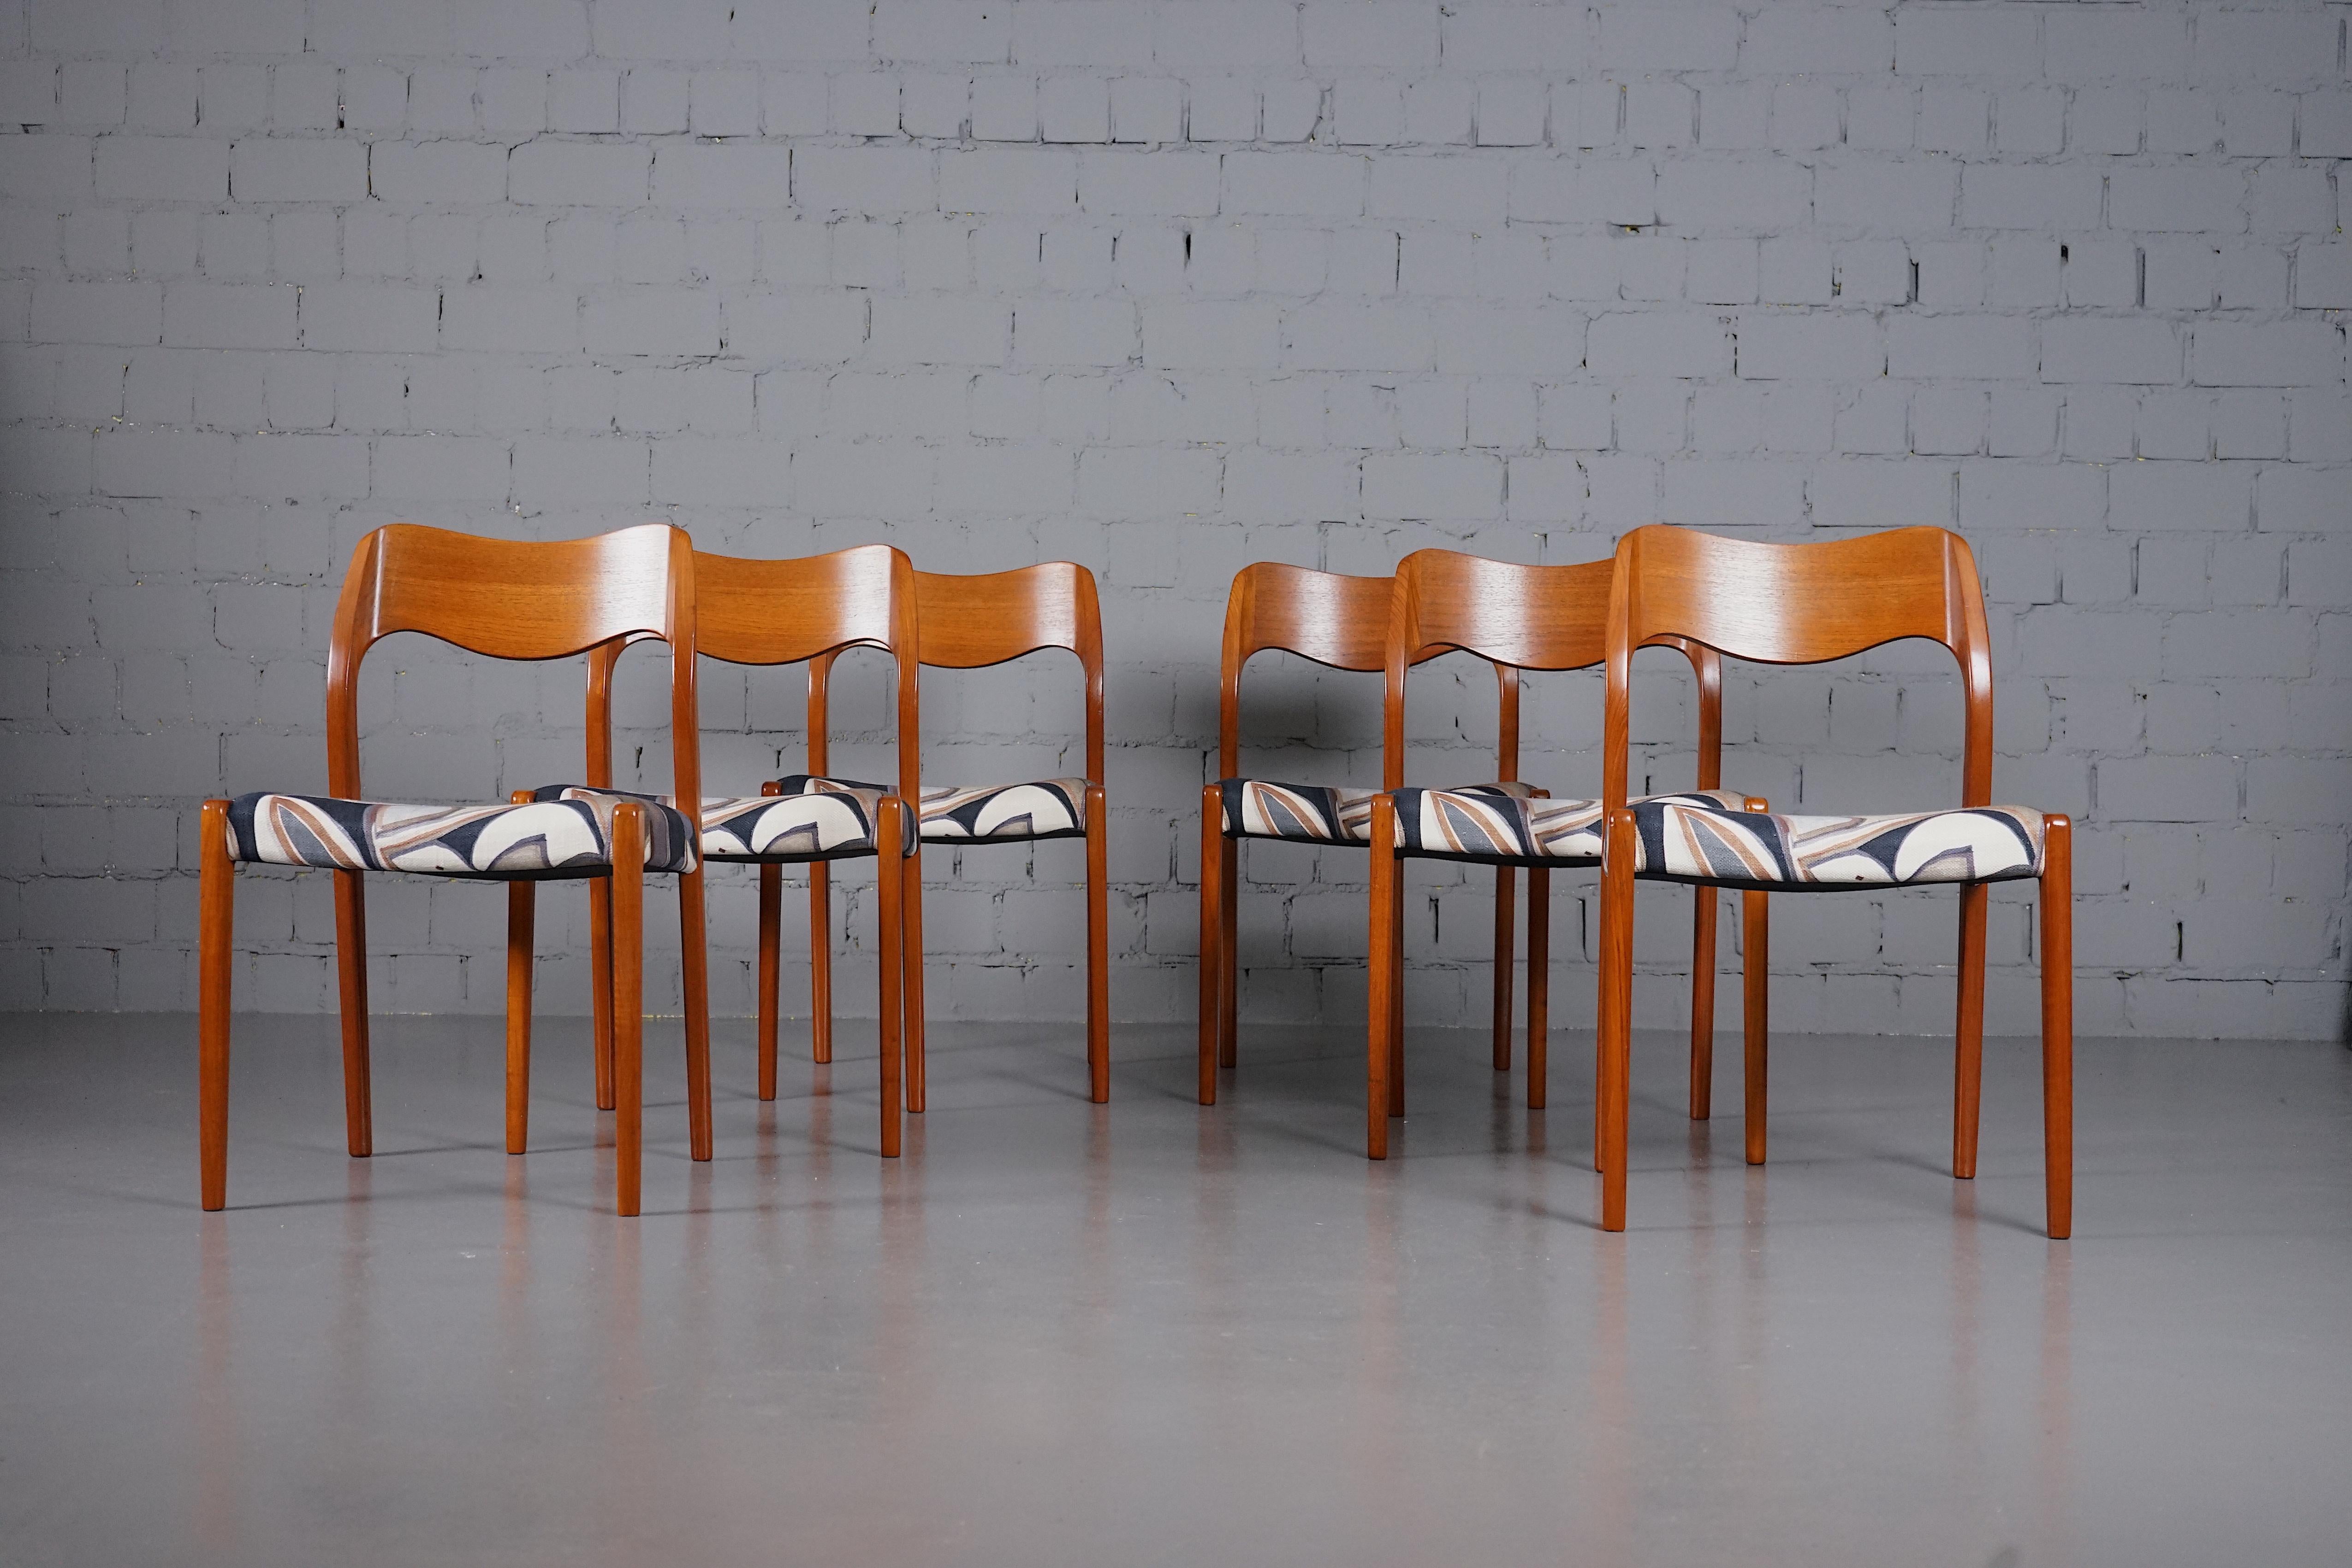 Model 71 dining chairs in Dedar Fabric by Niels Otto Møller for JL Møllers 1950s, Set of 6.
The chairs have been restored, refurbishing / oiling the wood while respecting the preservation of the patina. The straps and the upholstery were renewed